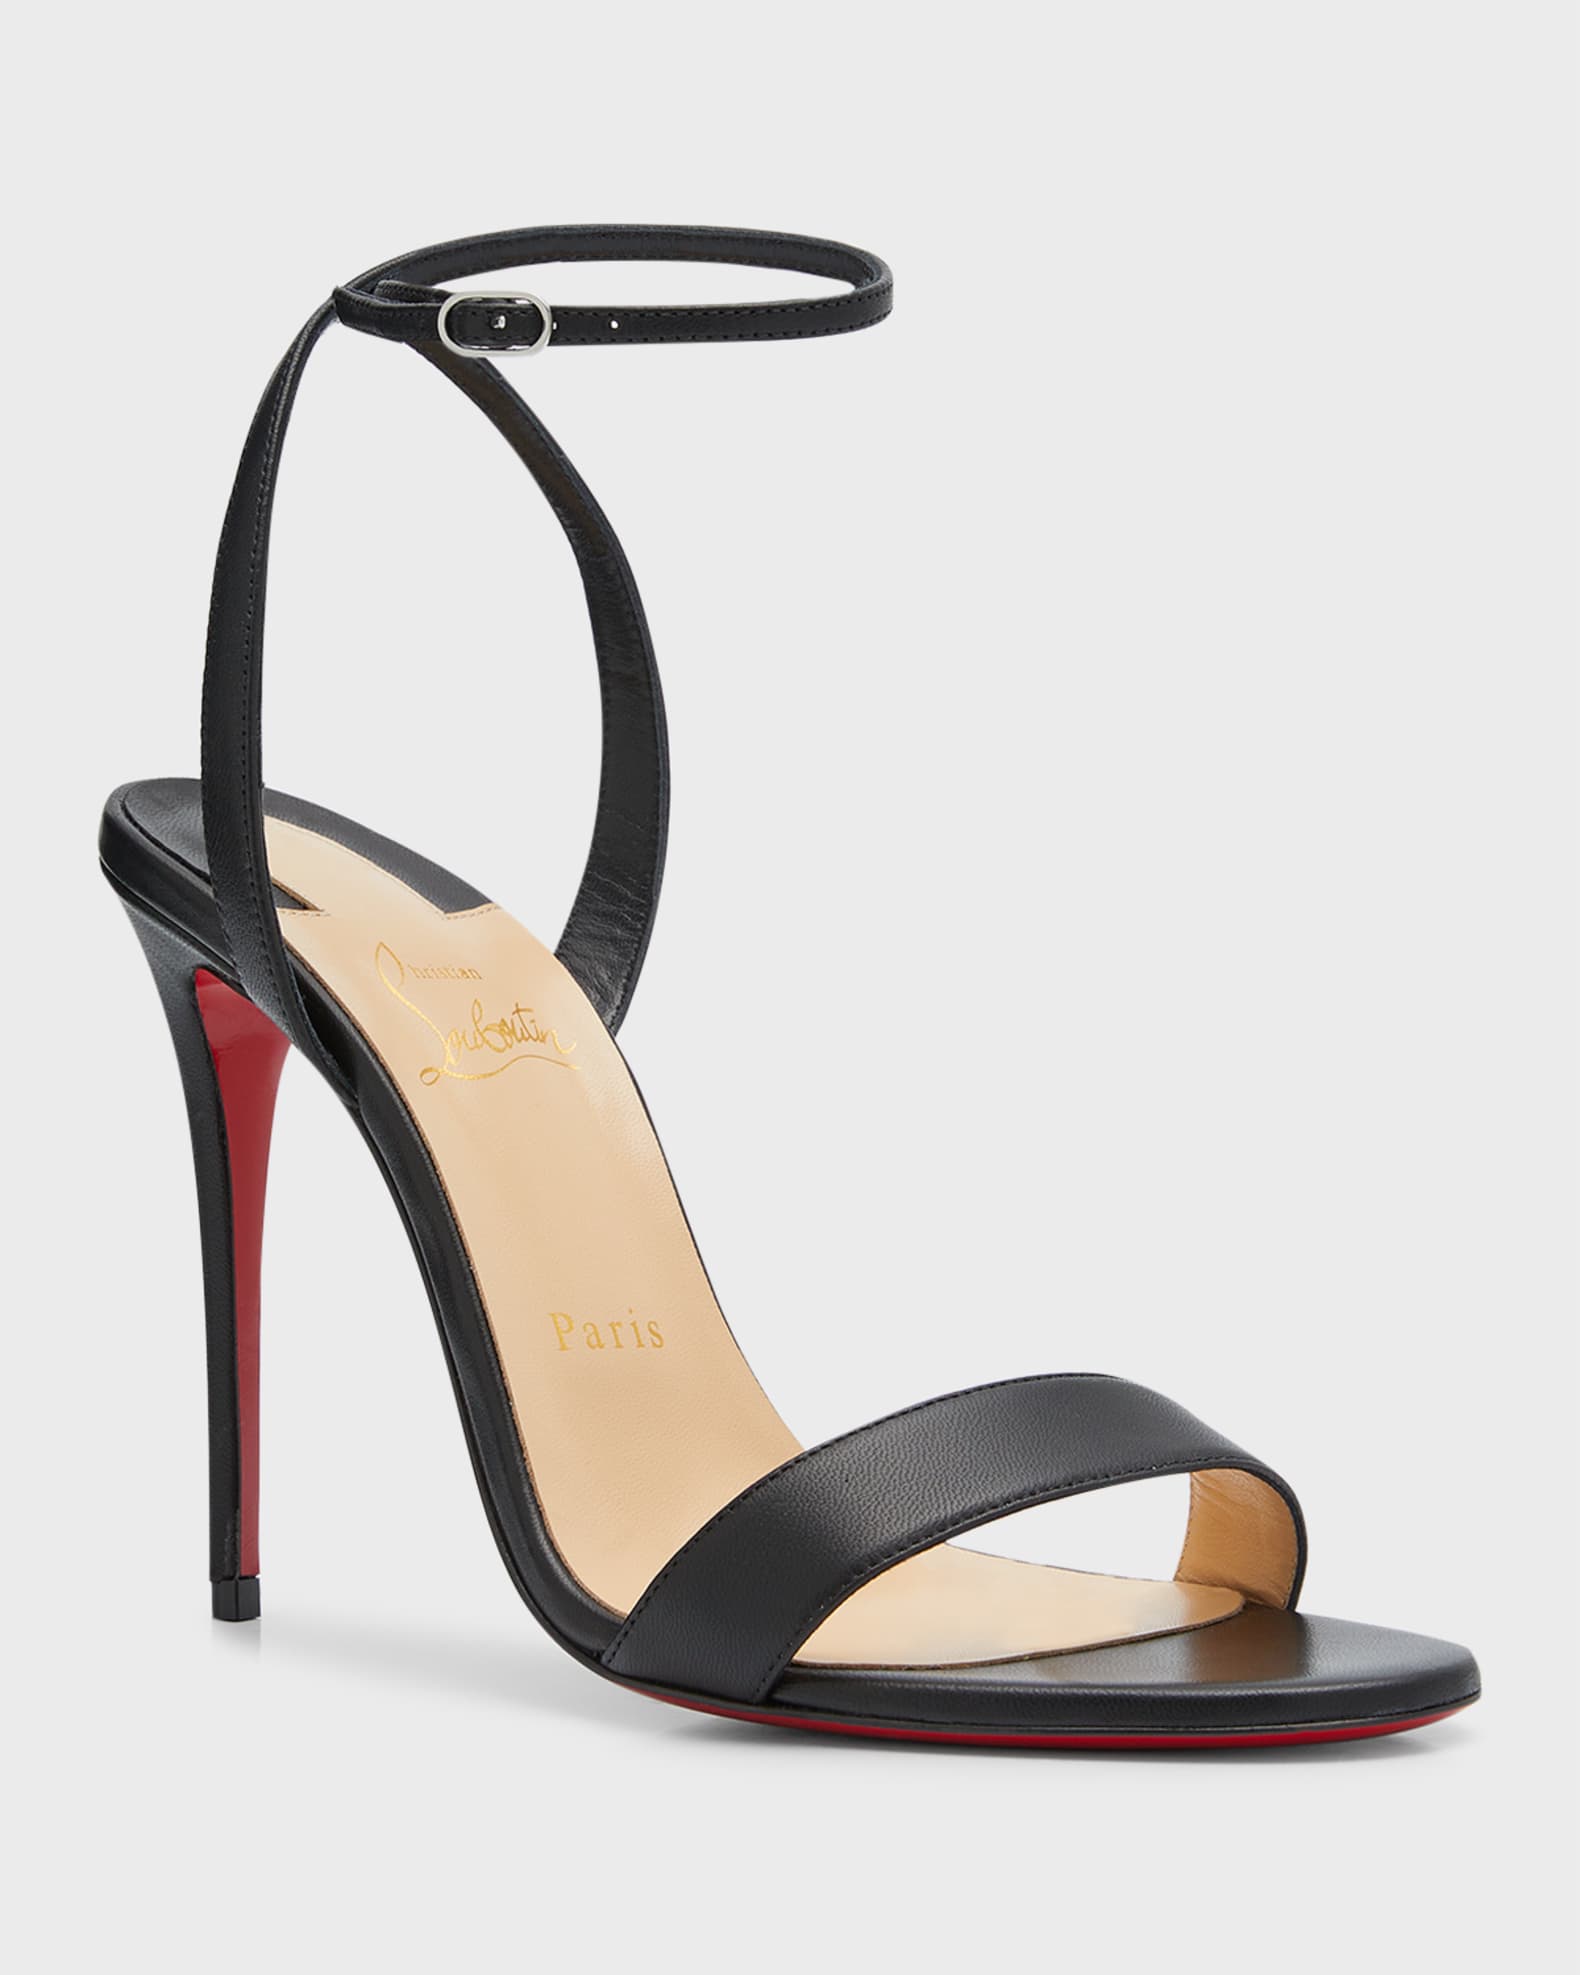 Christian Louboutin Loubigirl Ankle-Strap Red Sole Sandals | Neiman Marcus